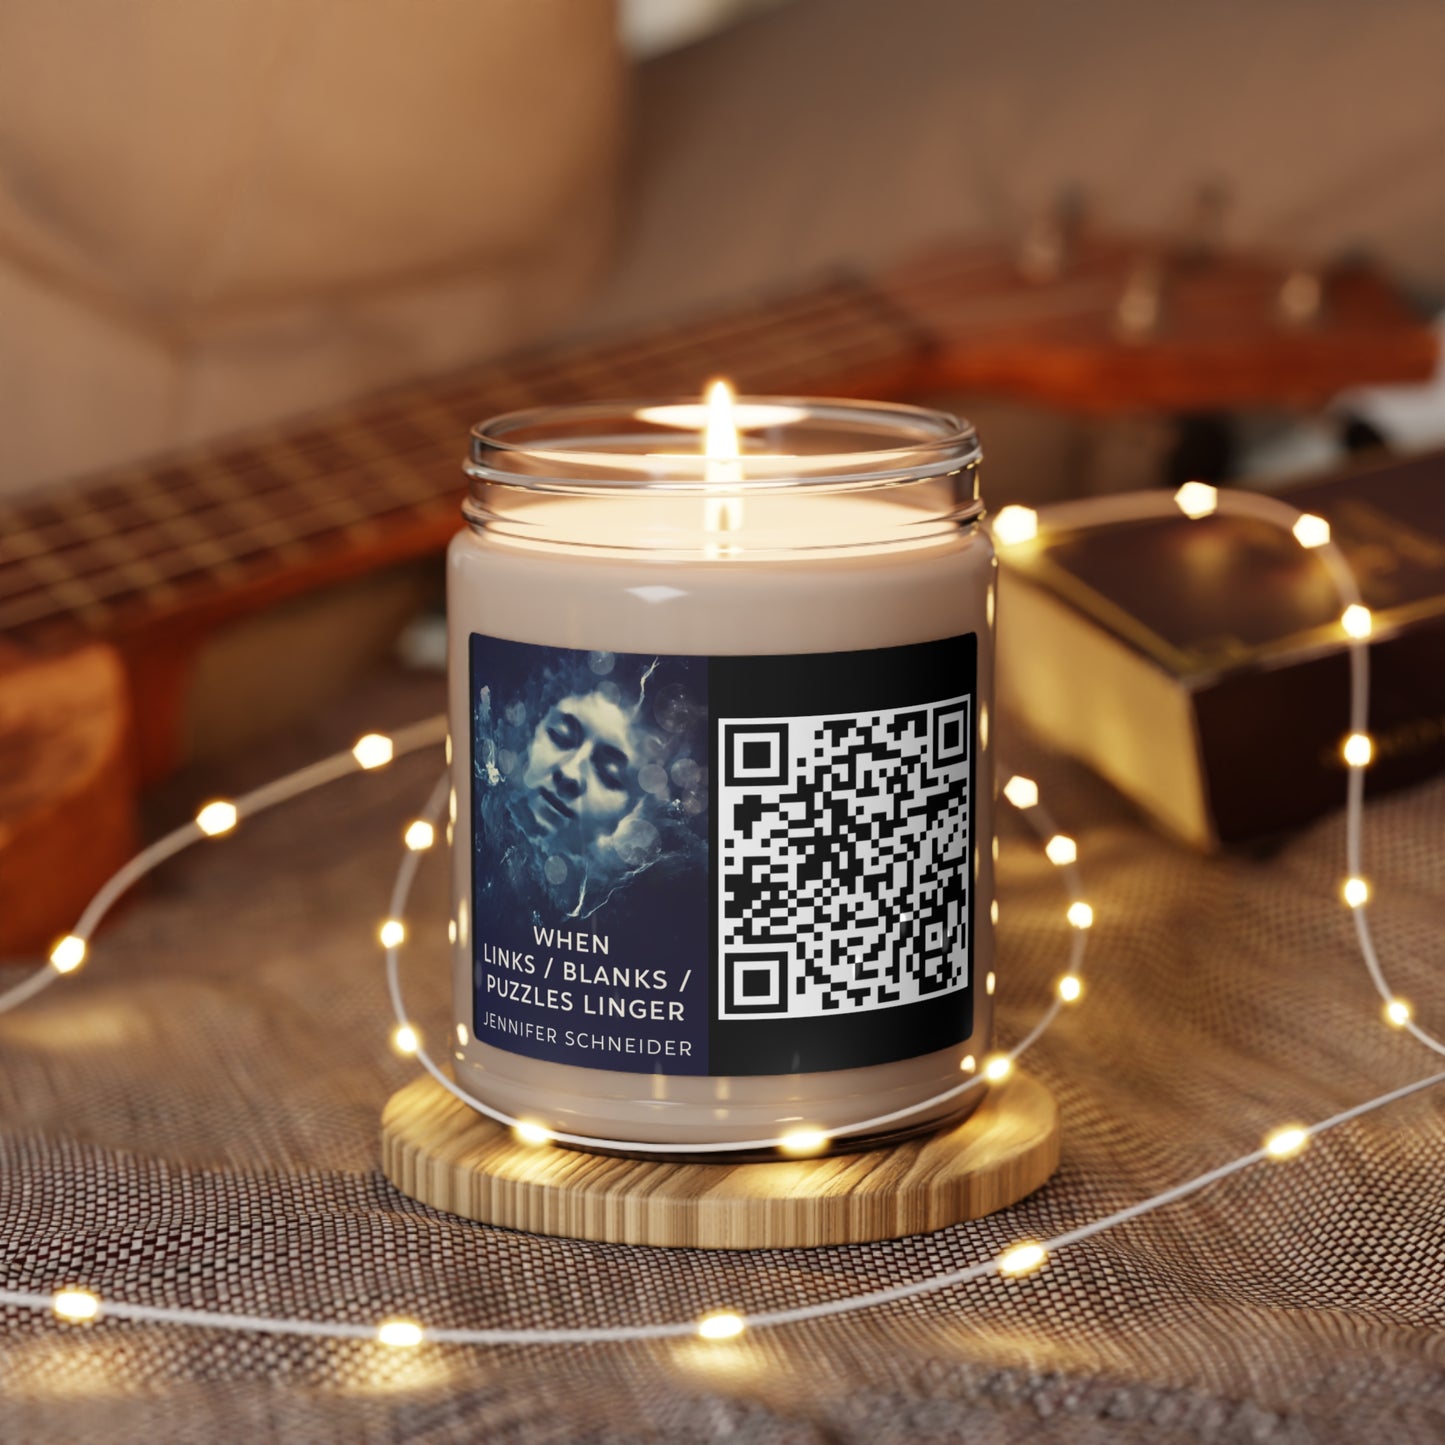 When Links / Blanks / Puzzles Linger - Scented Soy Candle